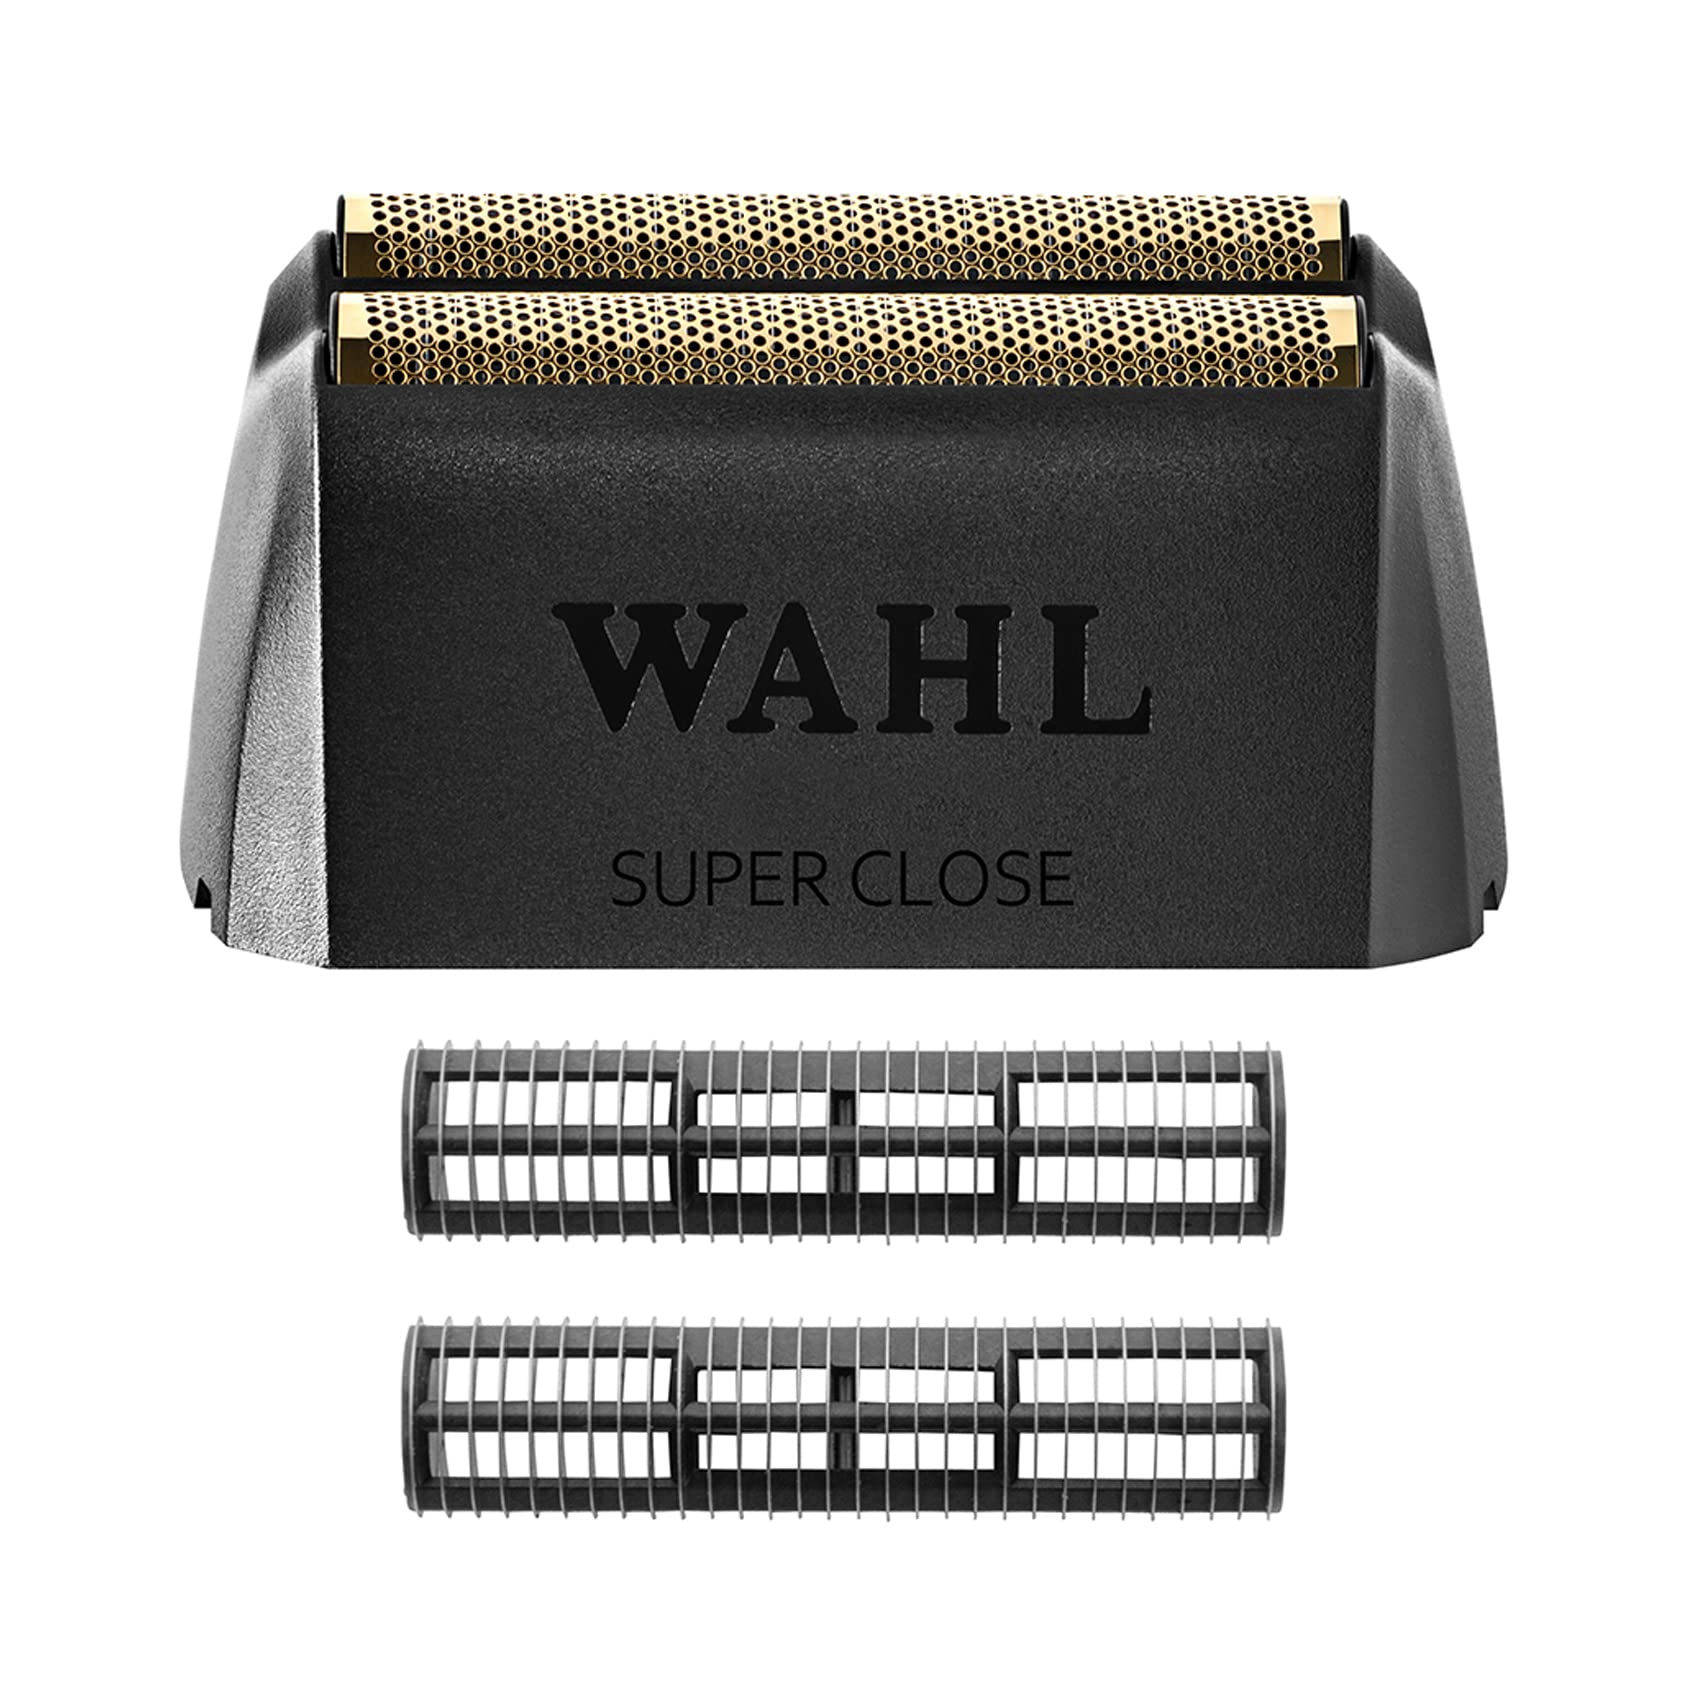 Wahl Professional - 5 Star Series Vanish Shaver Replacement Super Close Gold Foil & Cutter Bar Assembly, Super Close, Bump Free Shaving for Professional Barbers and Stylists